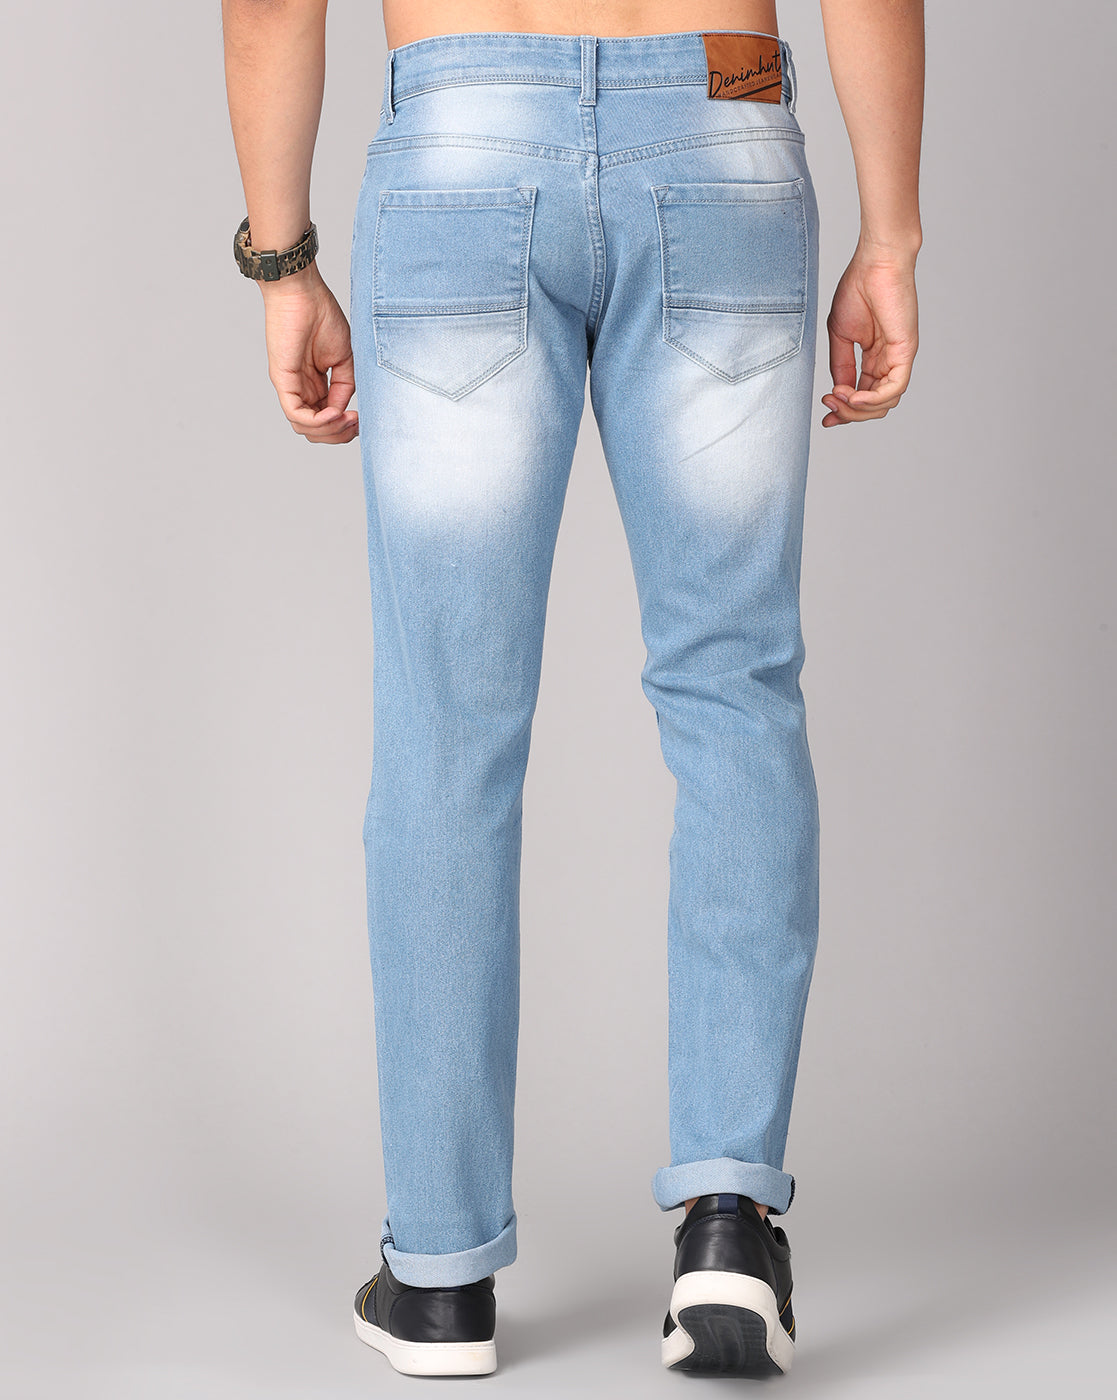 Admiral Blue Heavy Faded Denim Slim Fit Jeans